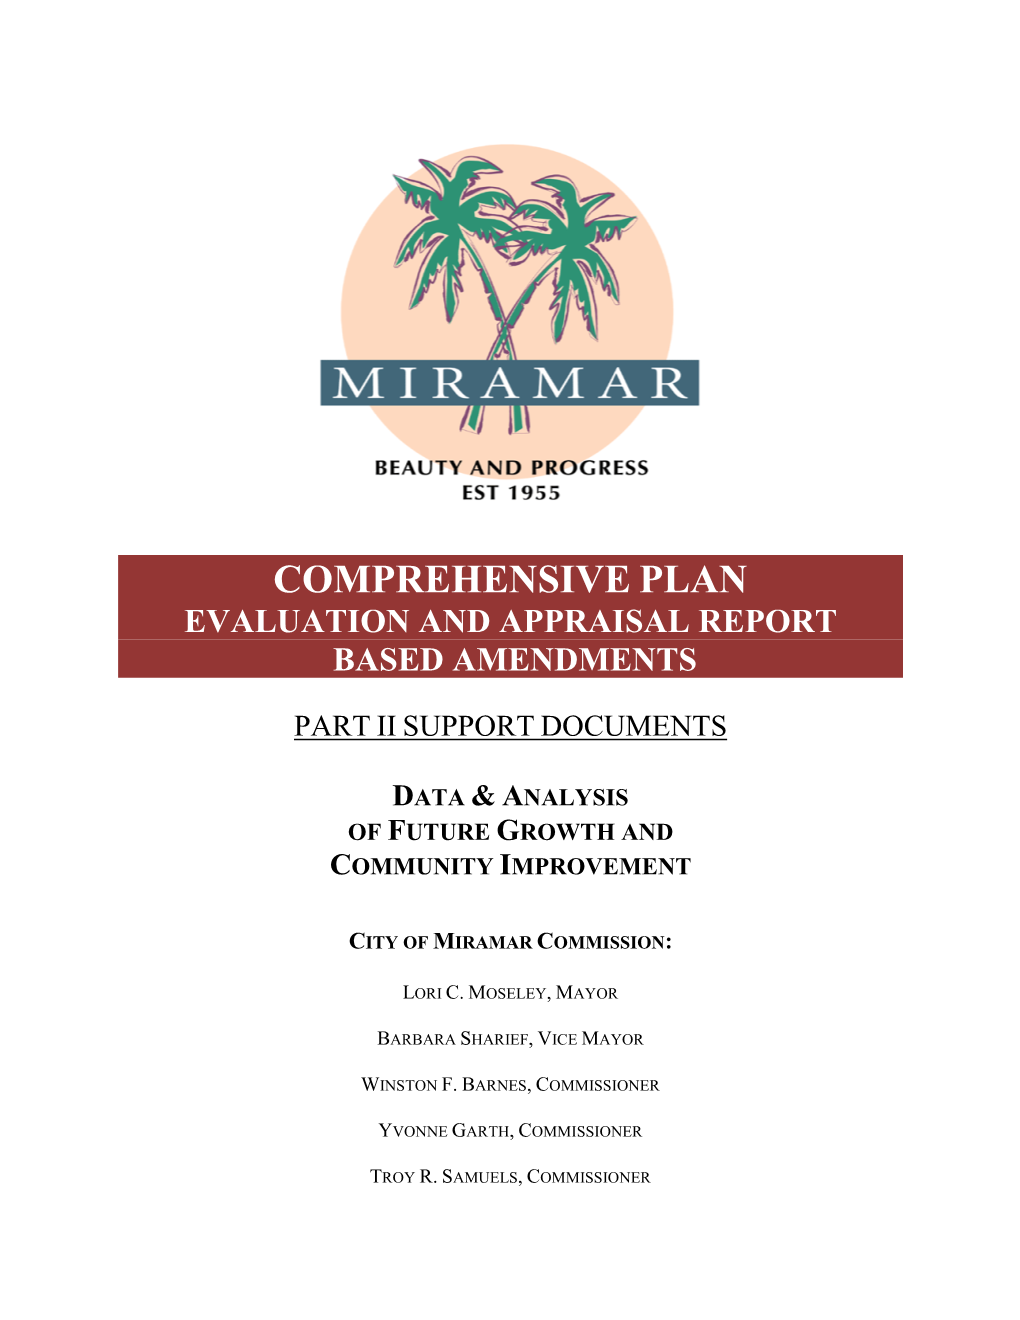 Comprehensive Plan Evaluation and Appraisal Report Based Amendments